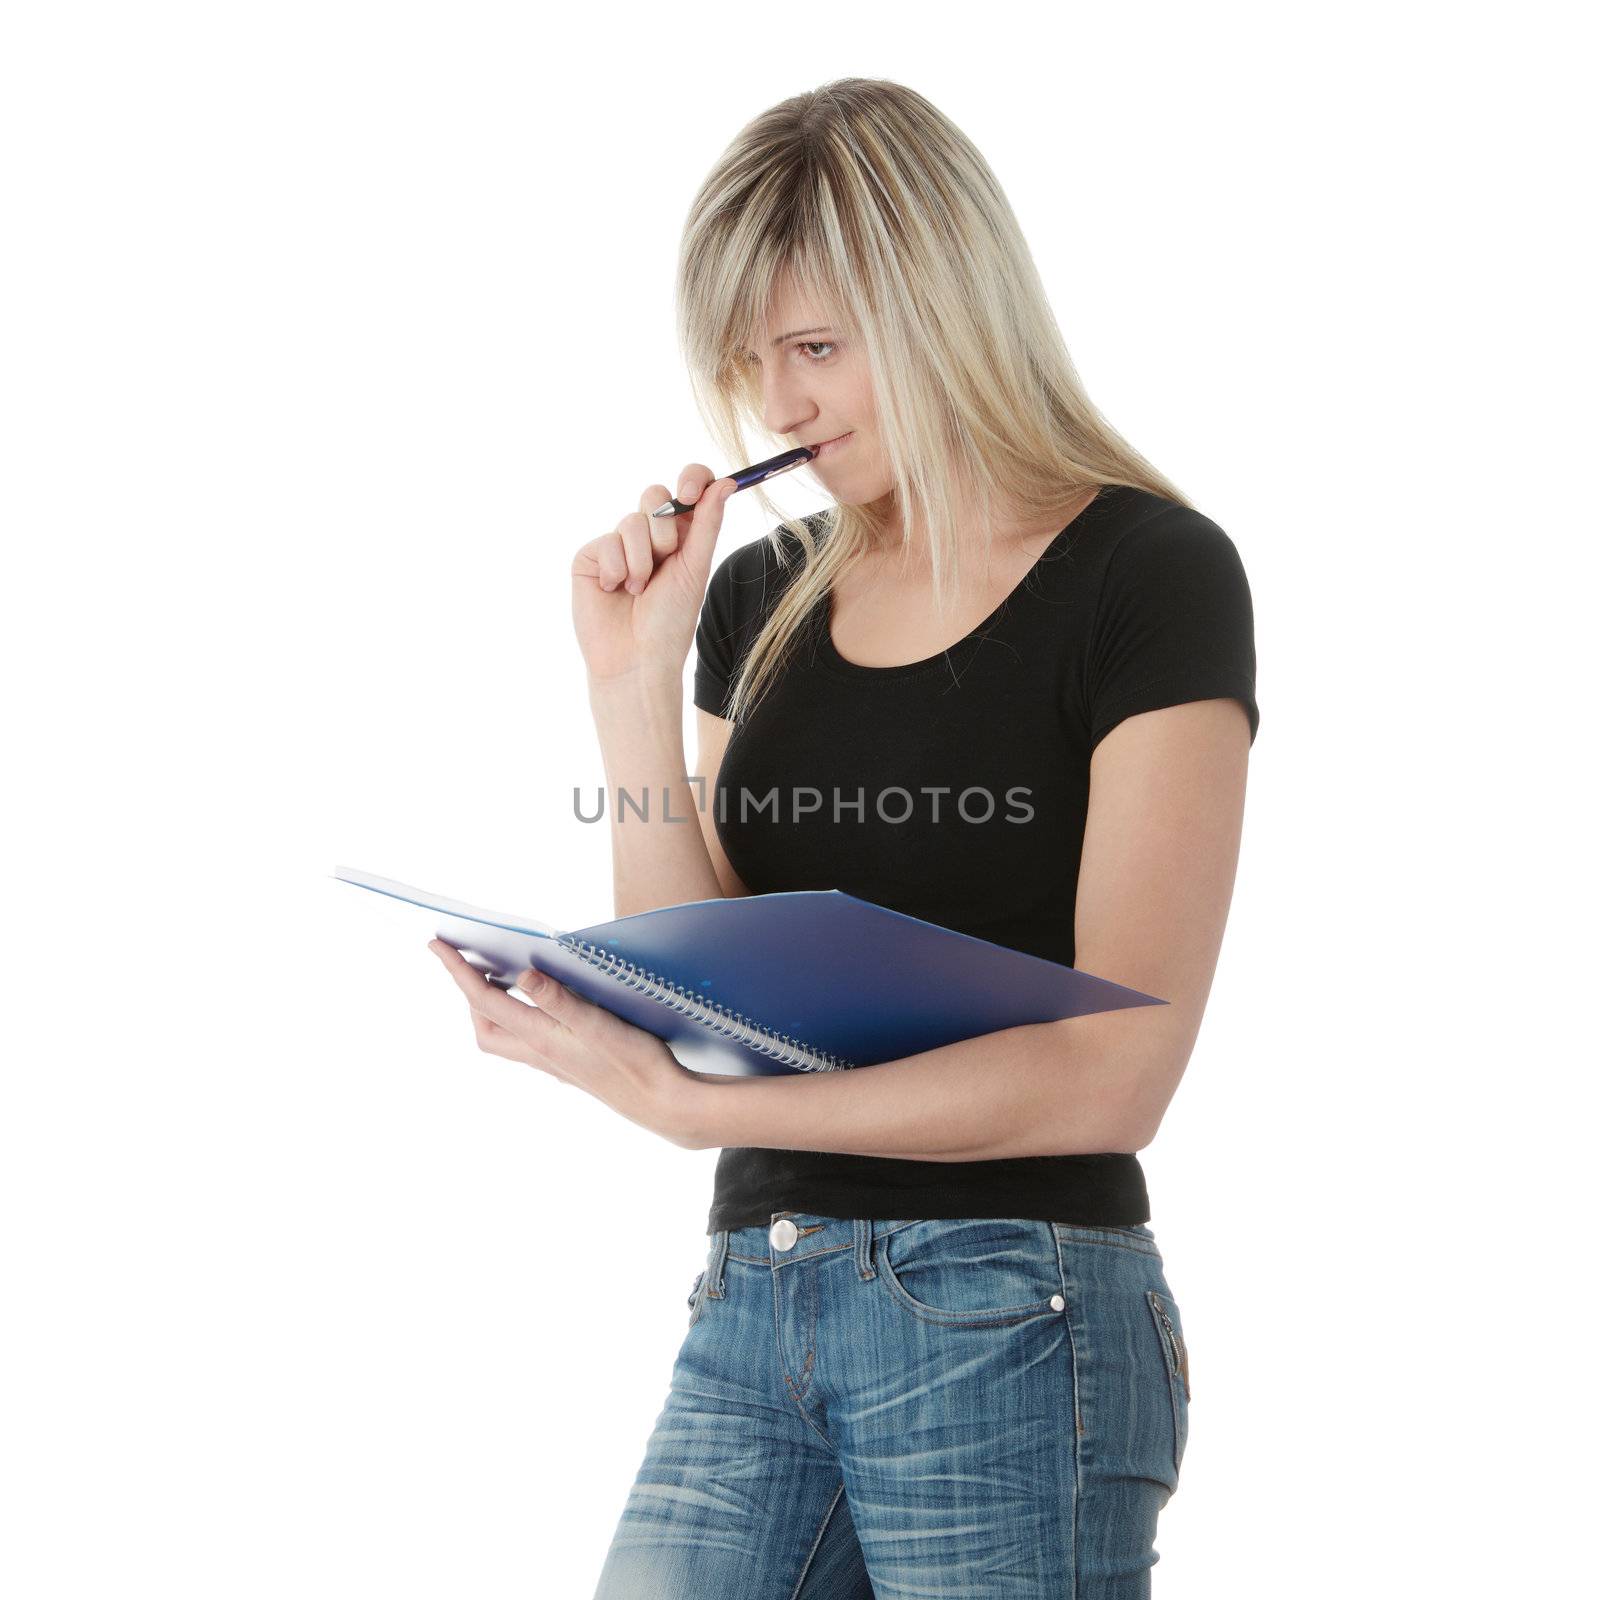 Student woman with note pad isolated on white background